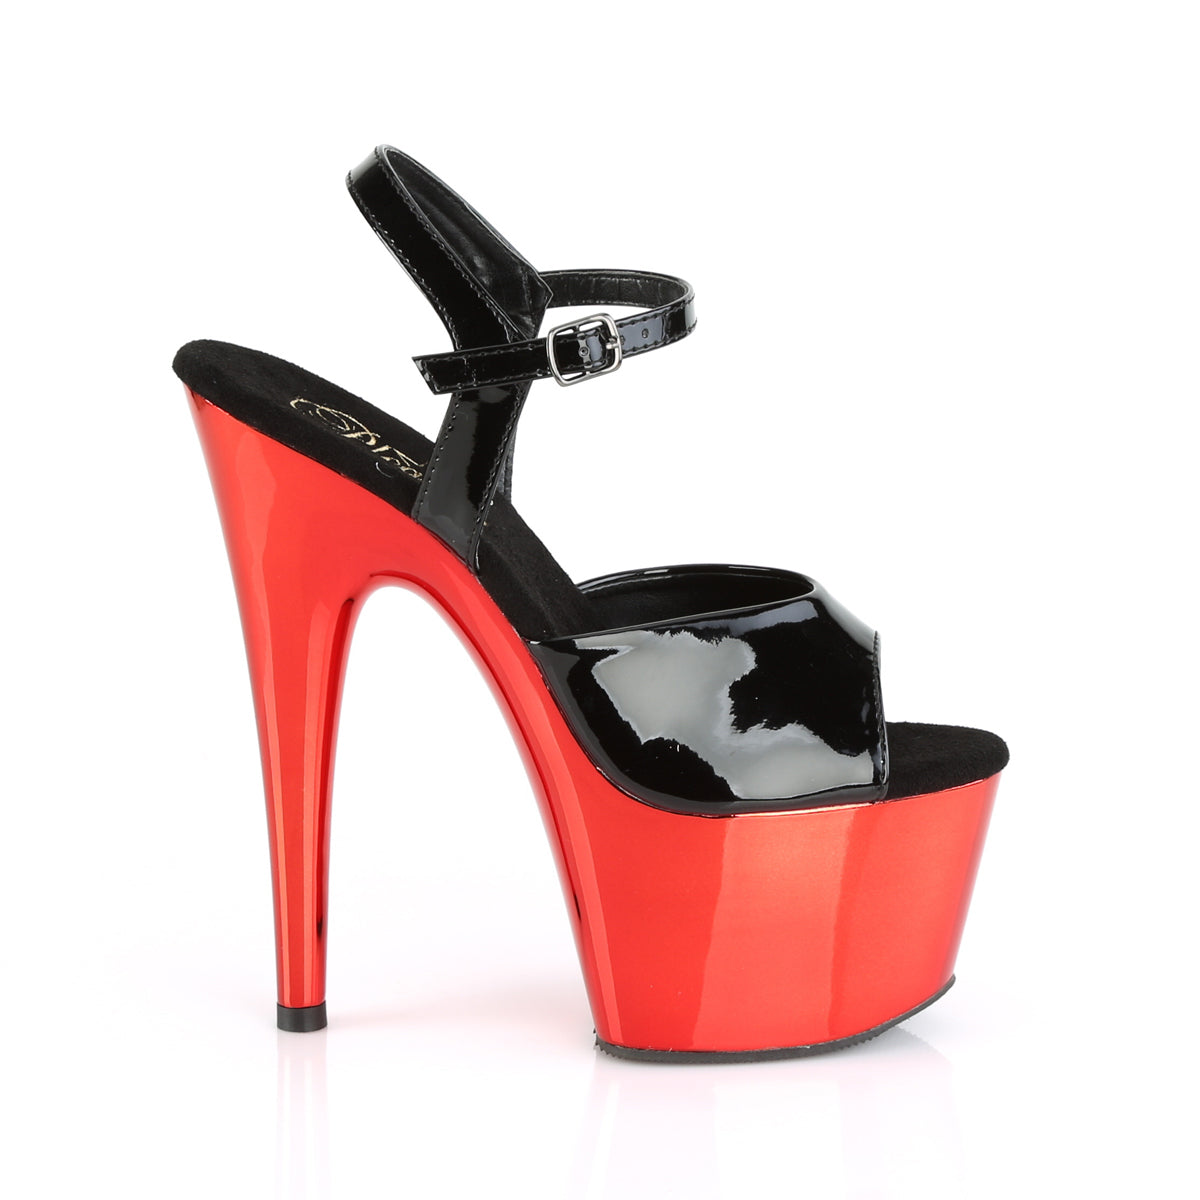 Pleaser Womens Sandals ADORE-709 Blk Pat/Red Chrome